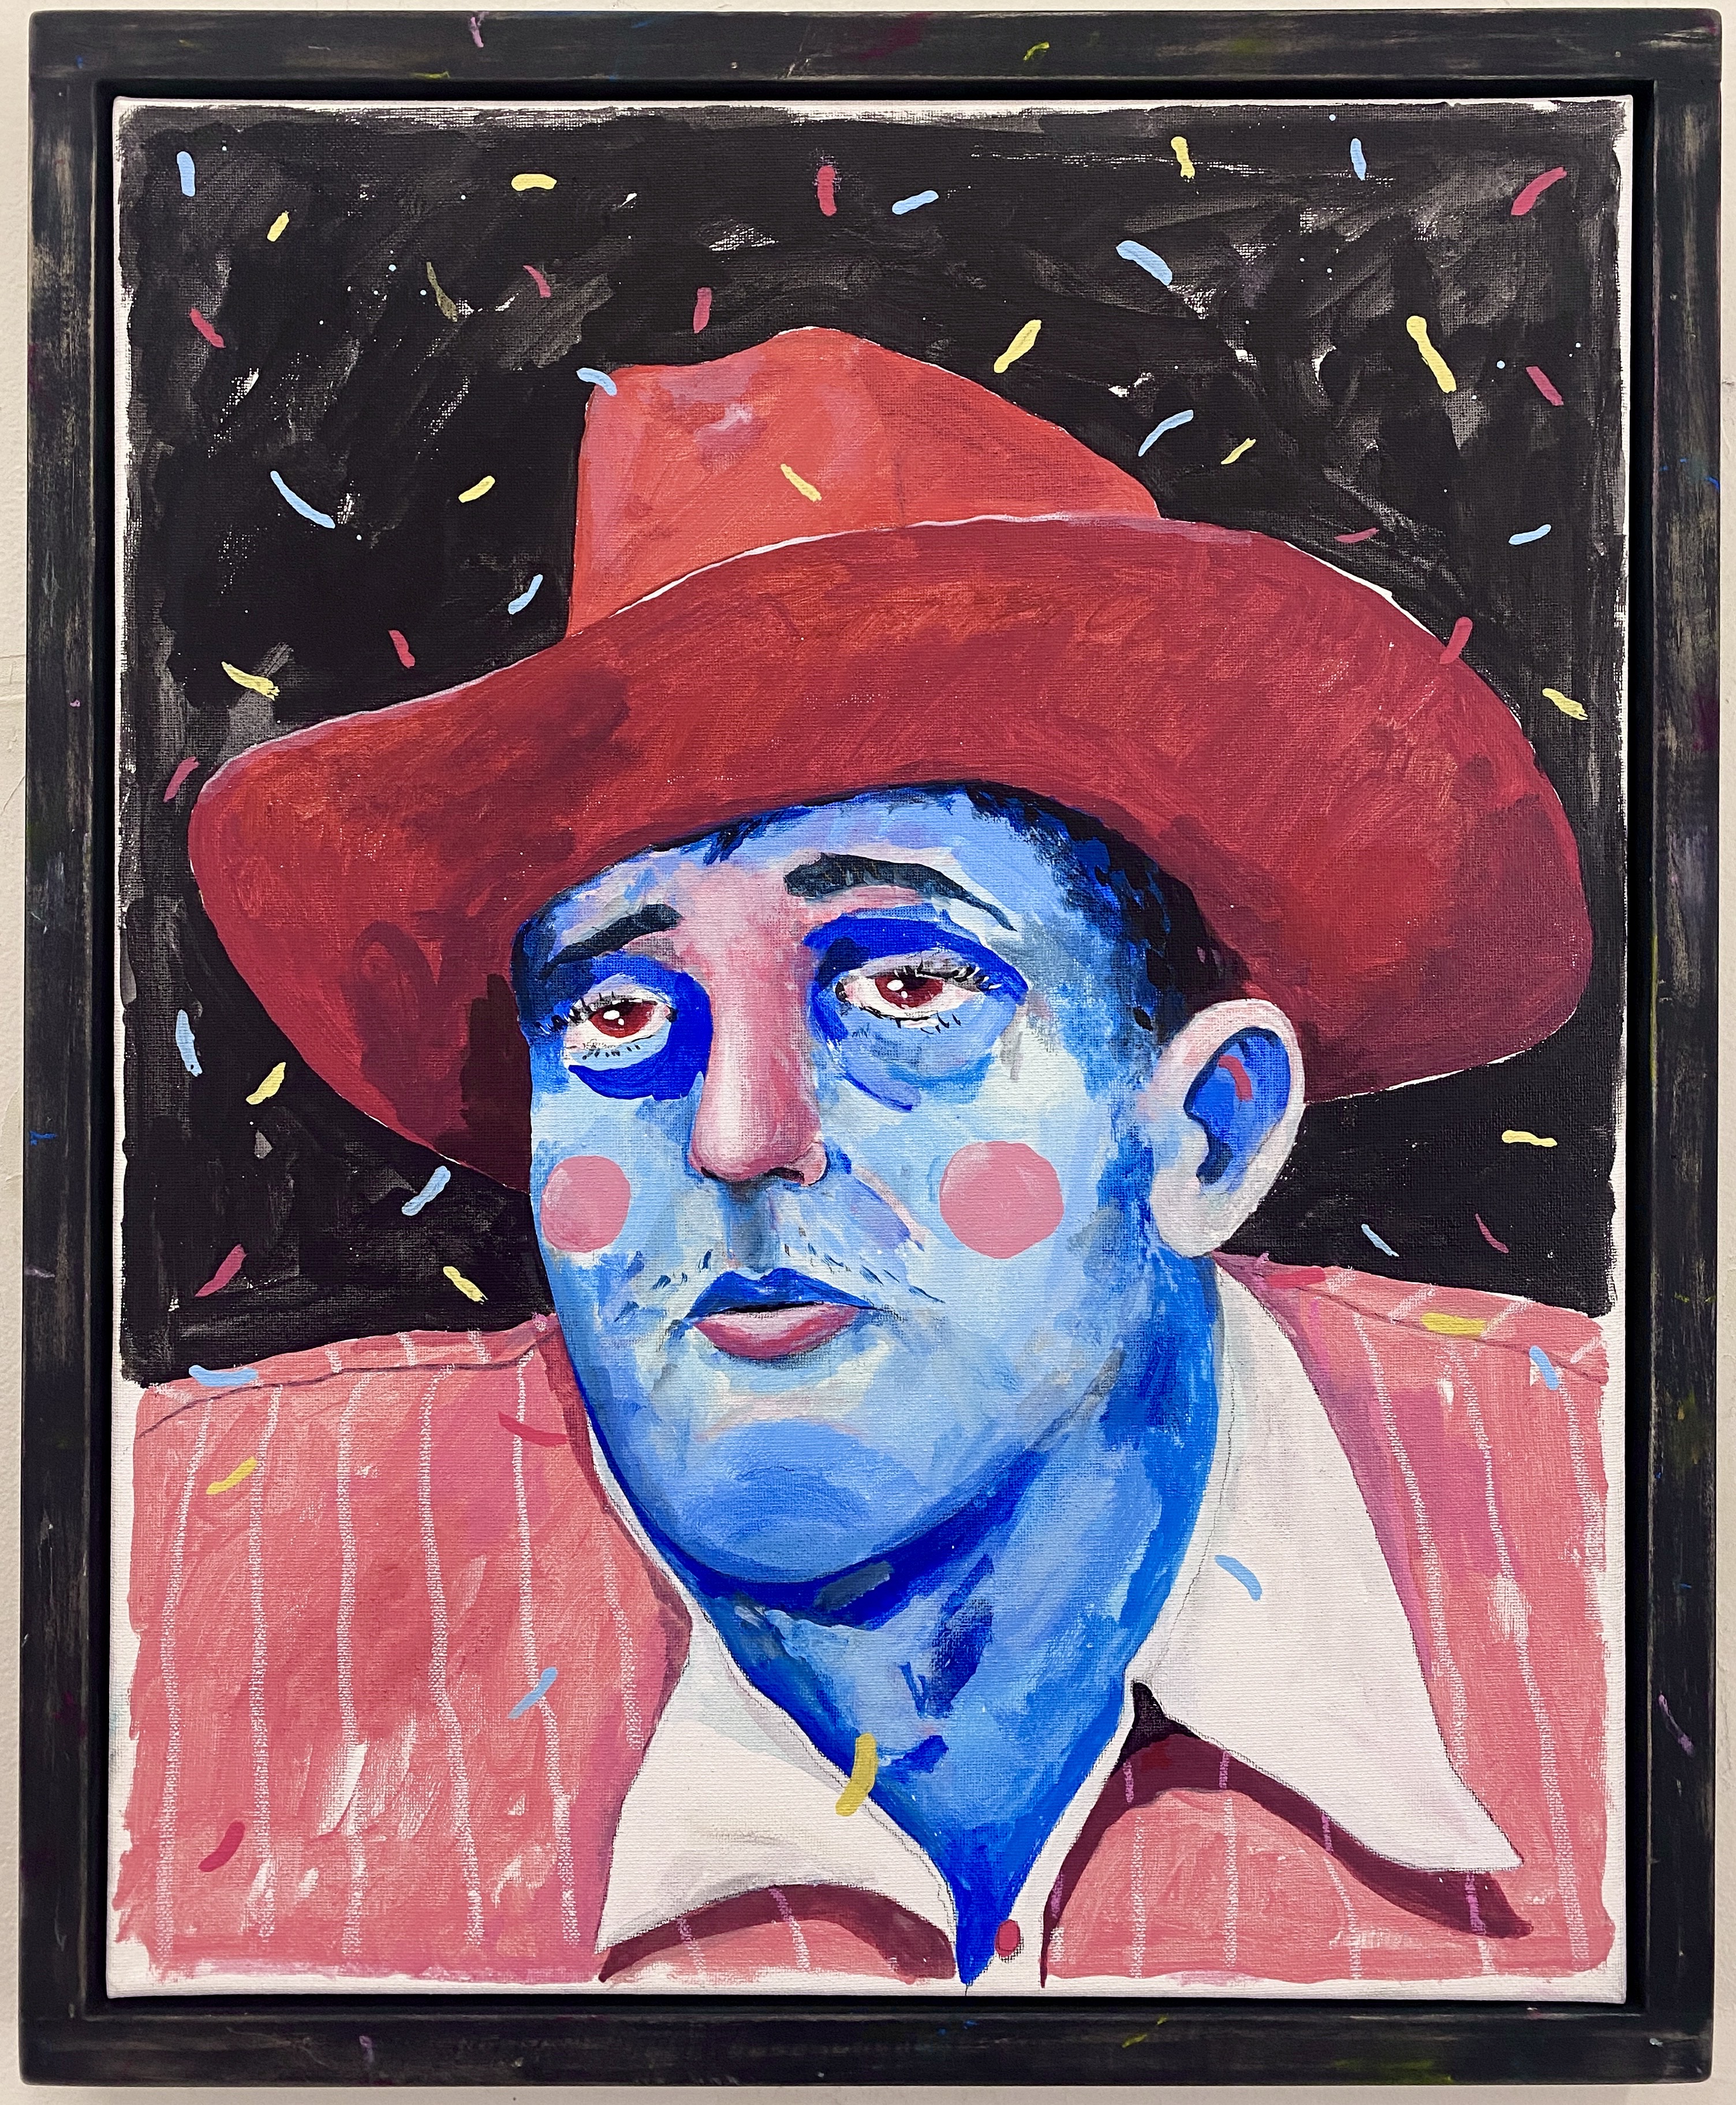 A cartoonish portrait of a blue skinned man wearing a red cowboy hat. The man looks sad